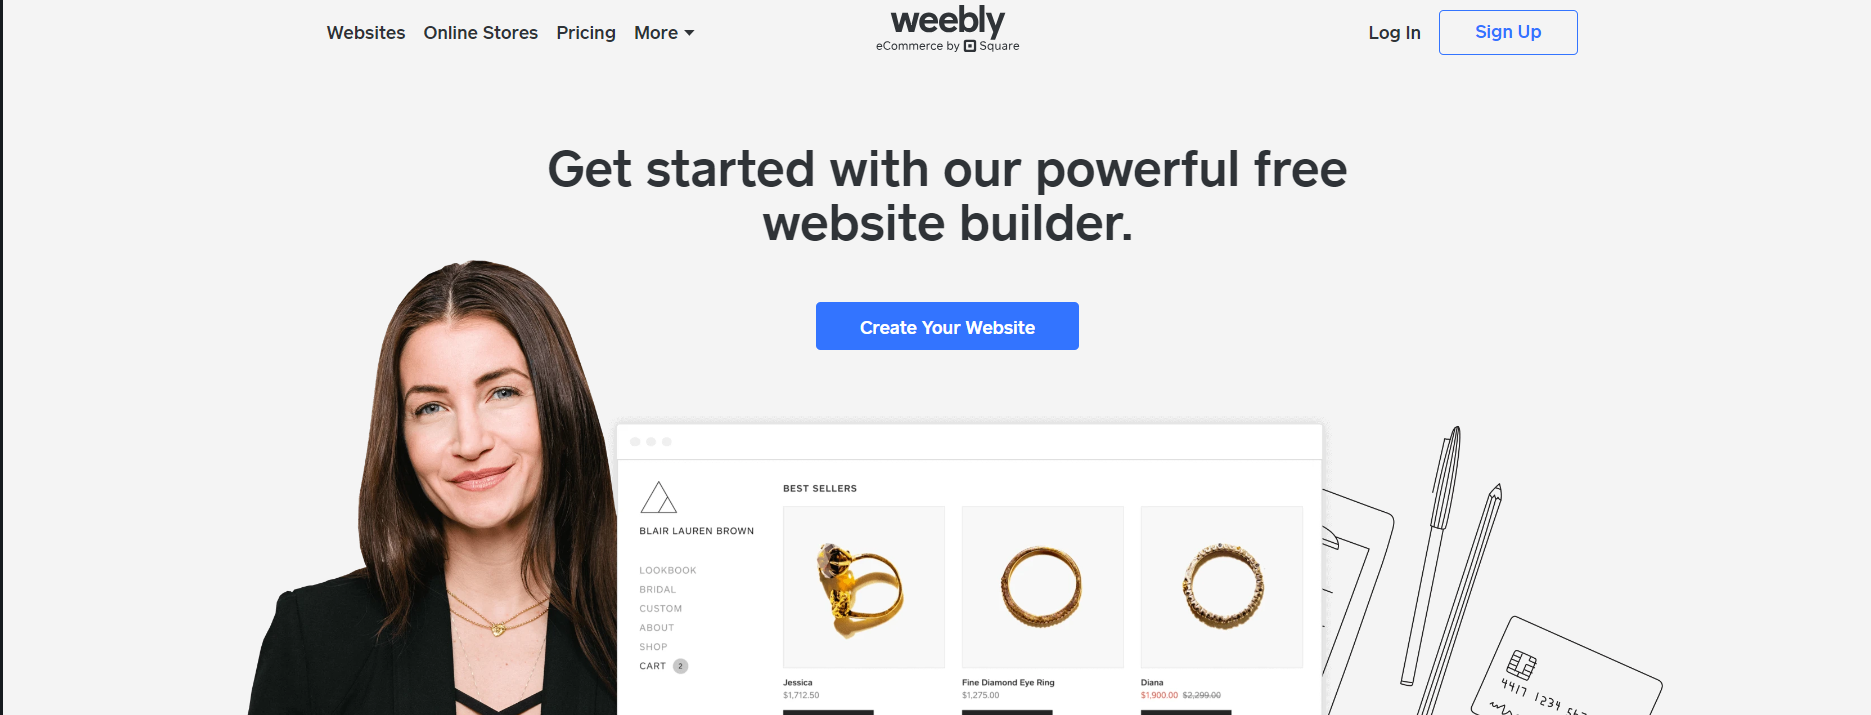 Weebly review